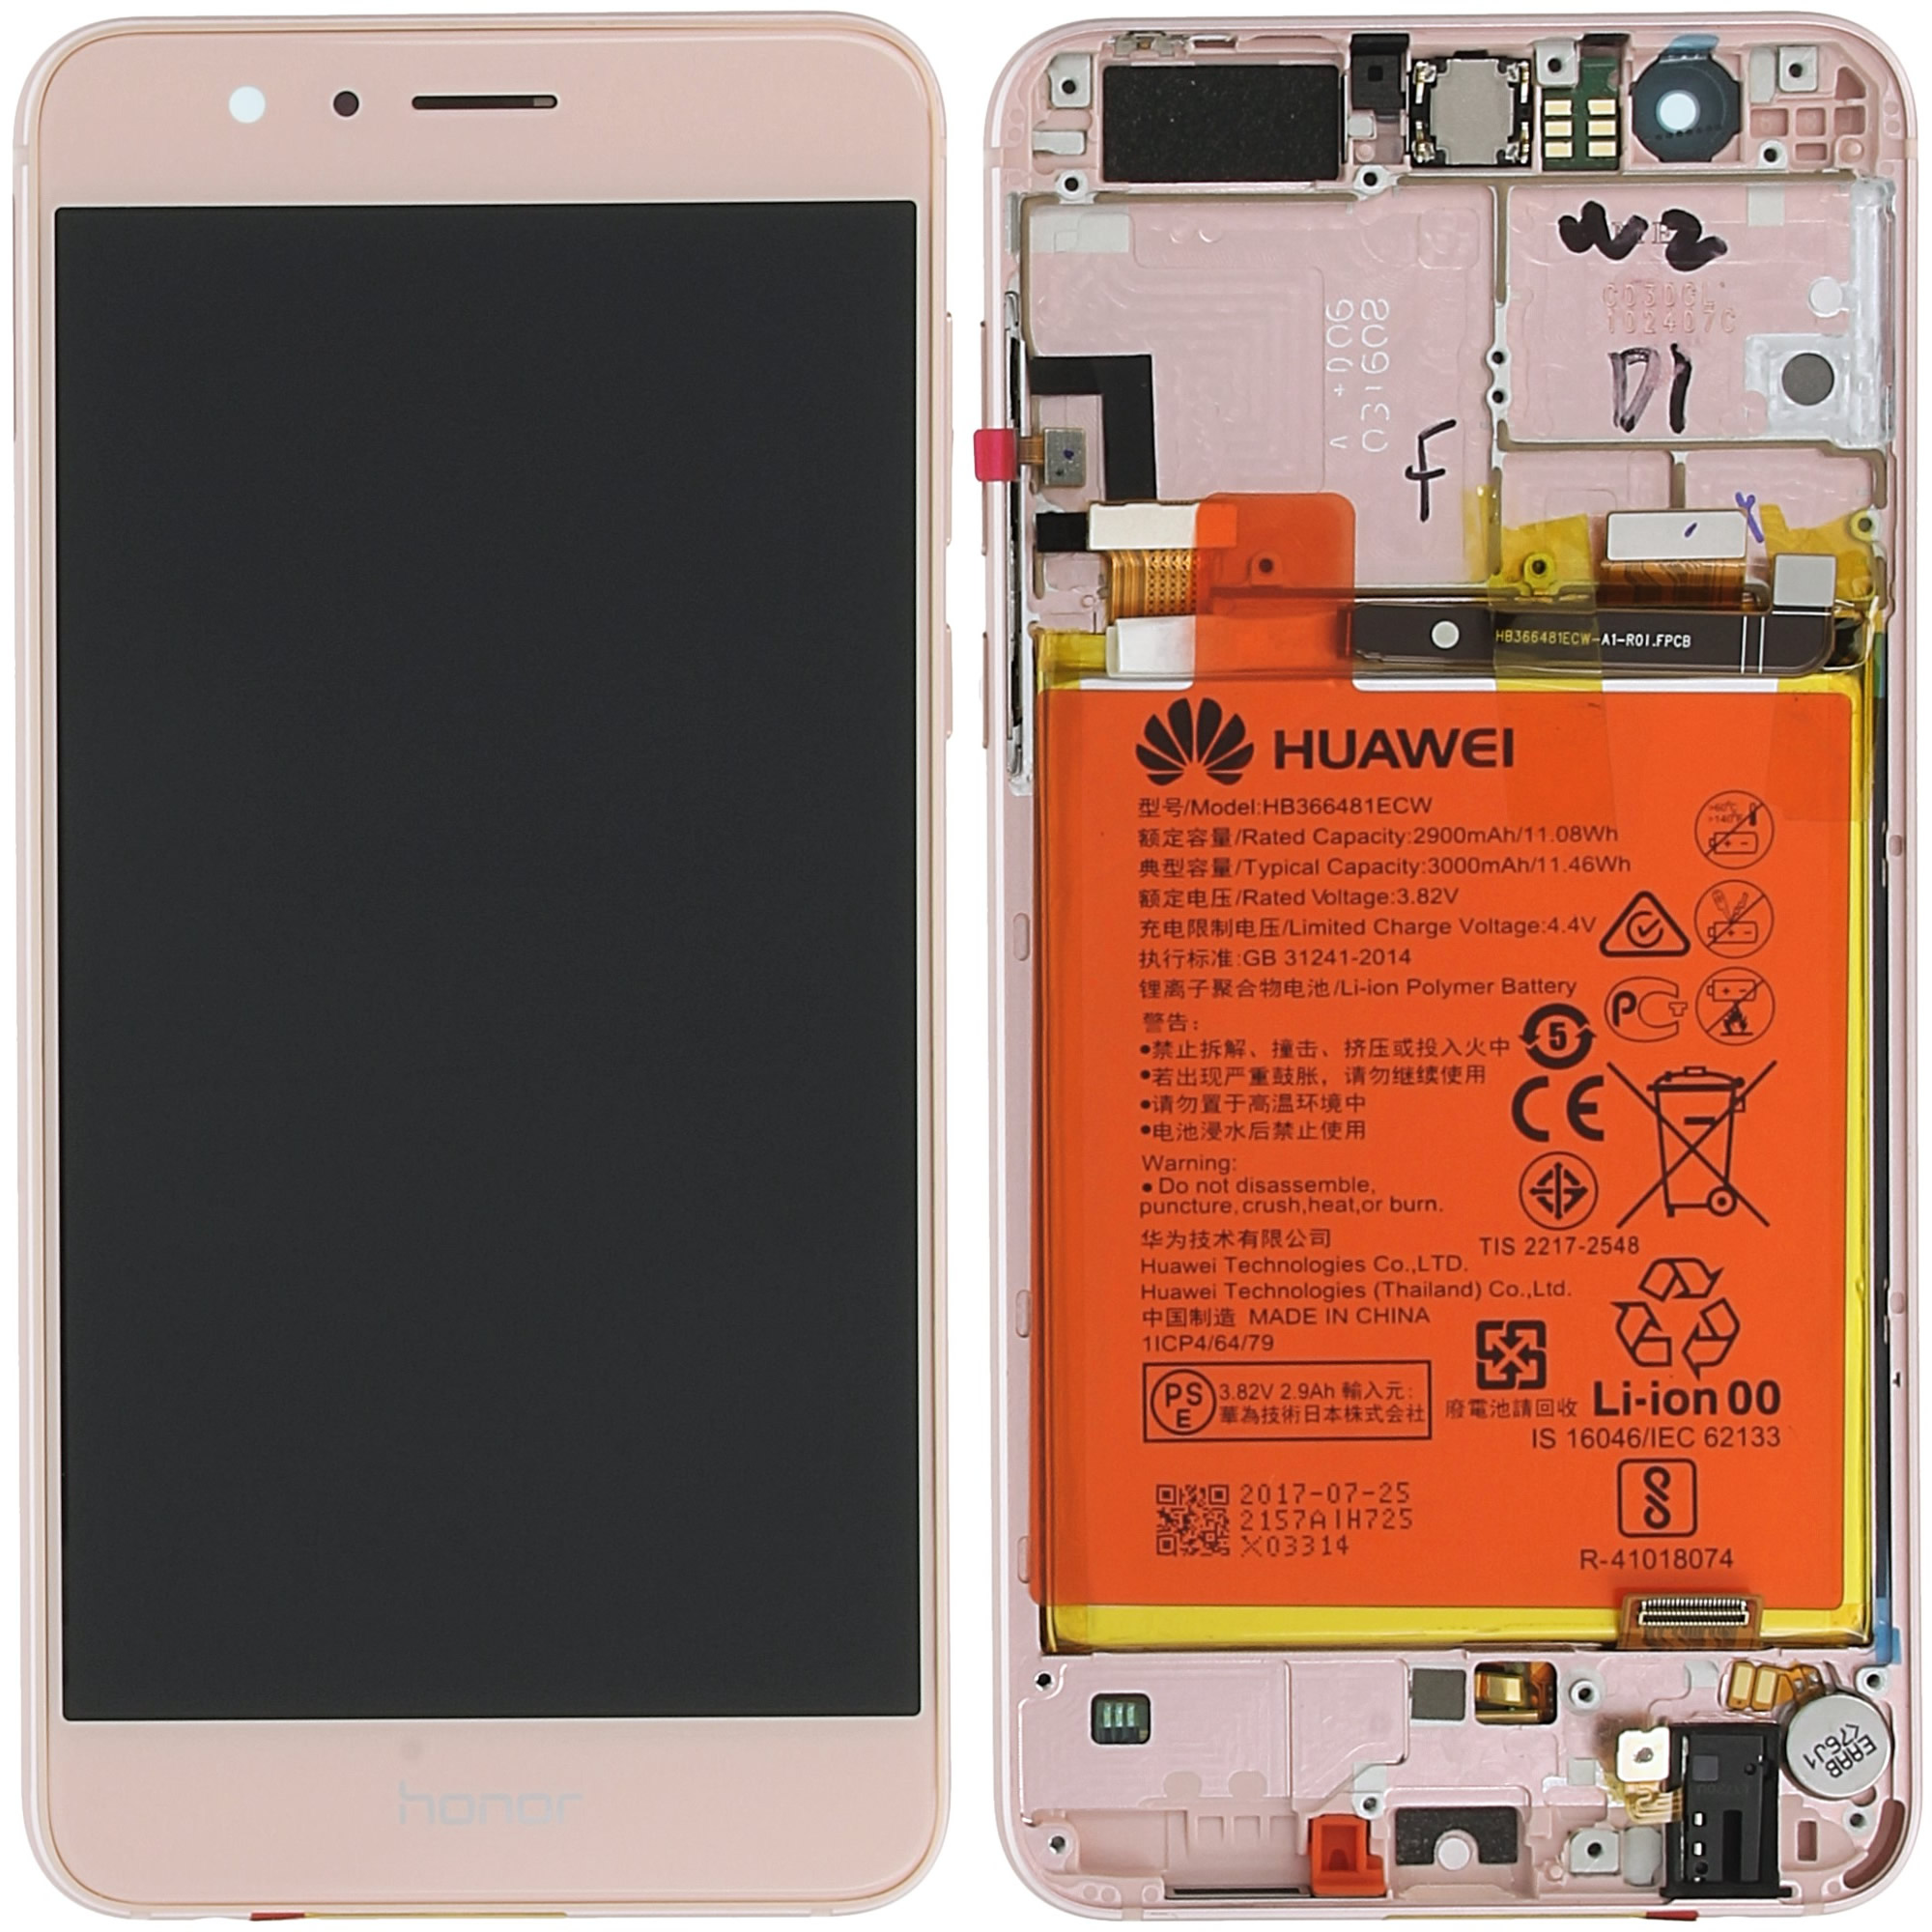 Huawei Honor 8 Frd L09 Frd L19 Display Module Front Cover Lcd Digitizer Battery Pink vat